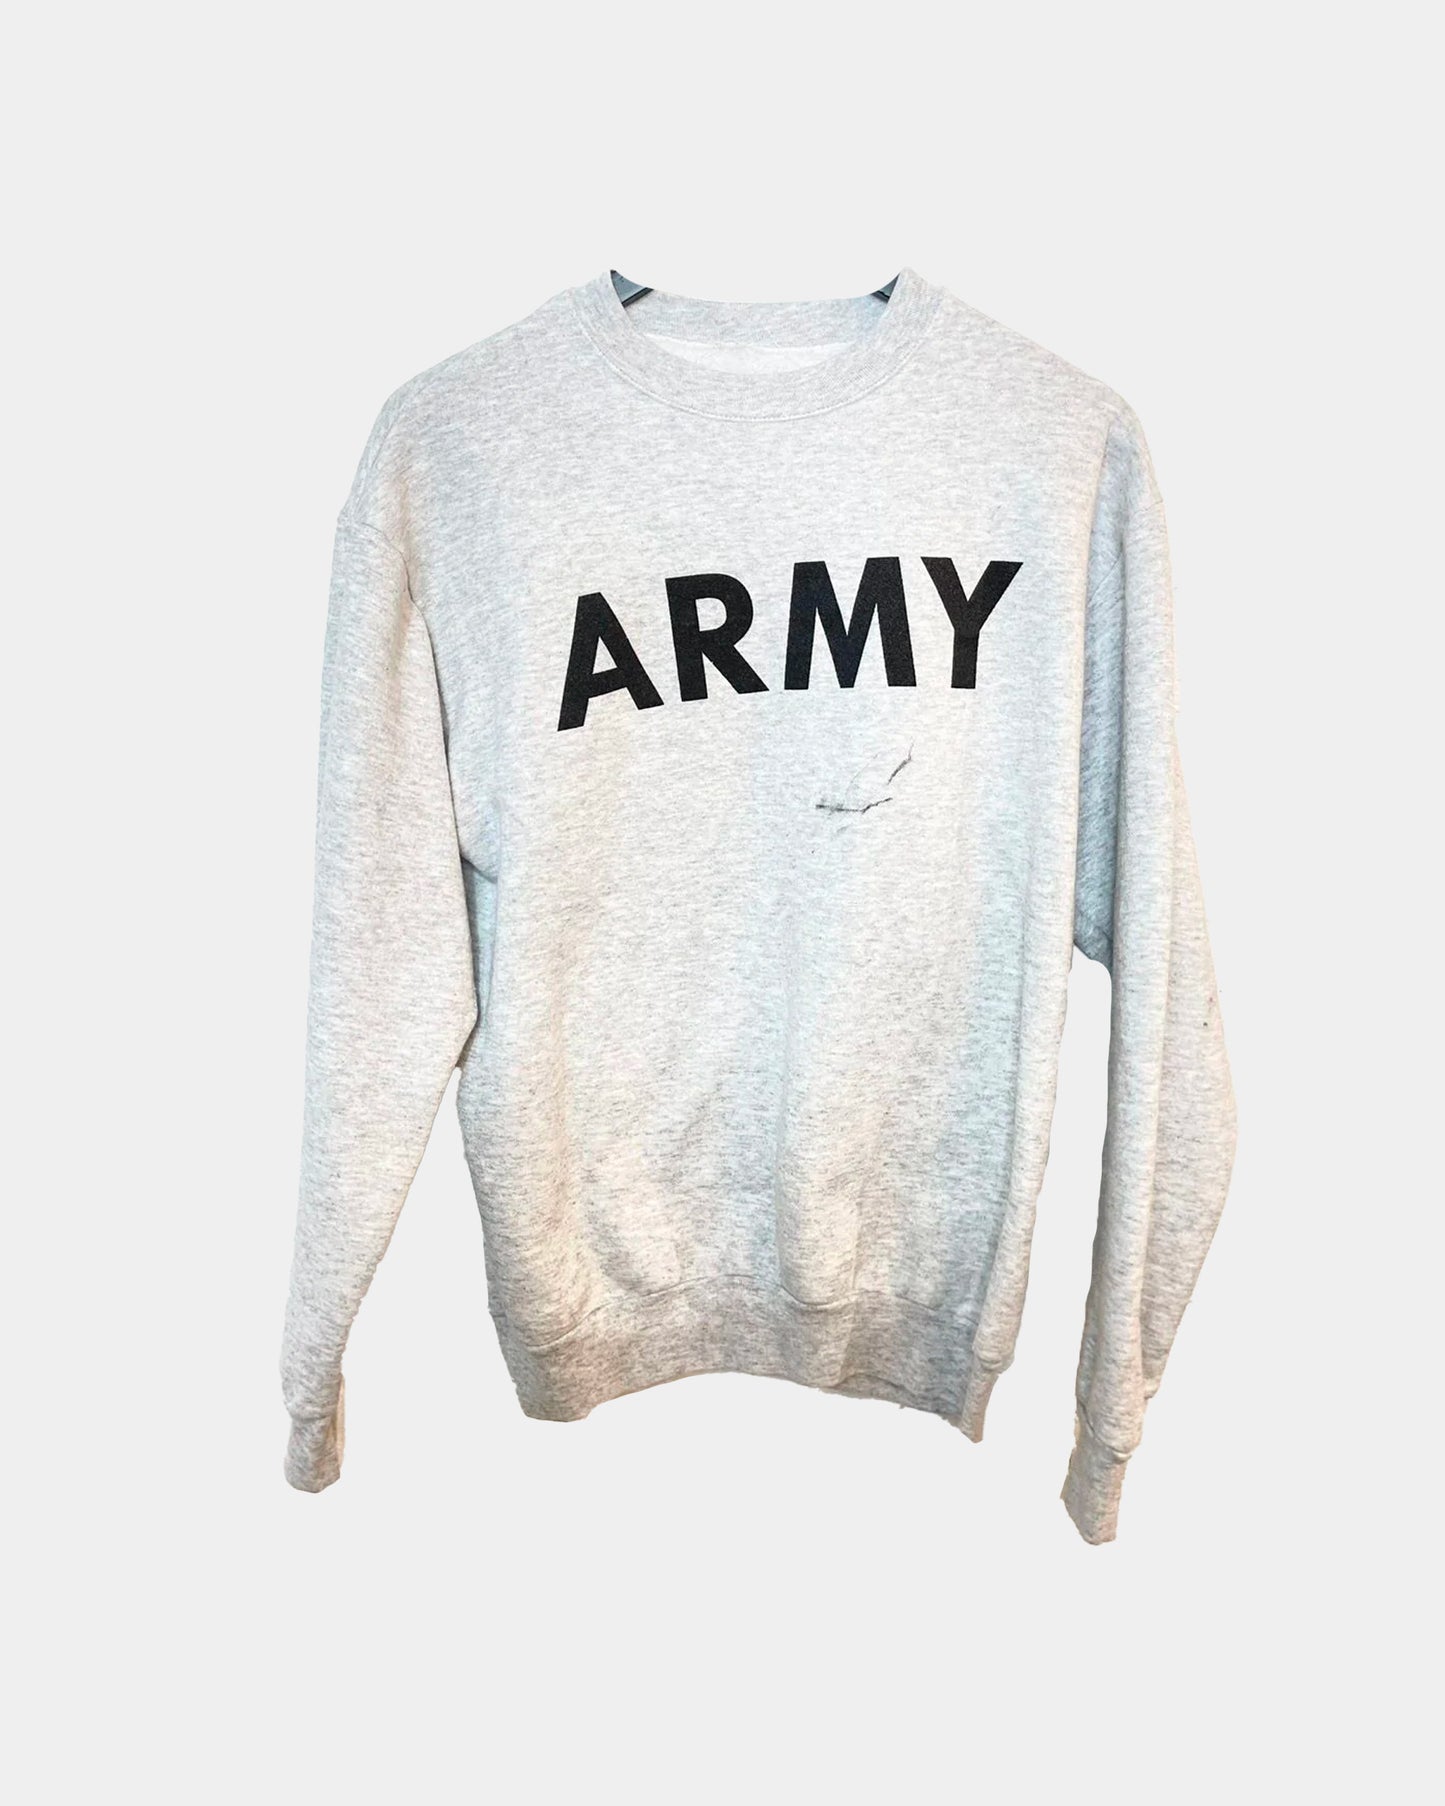 Vintage ARMY Soft Sweater Pull over Small Medium